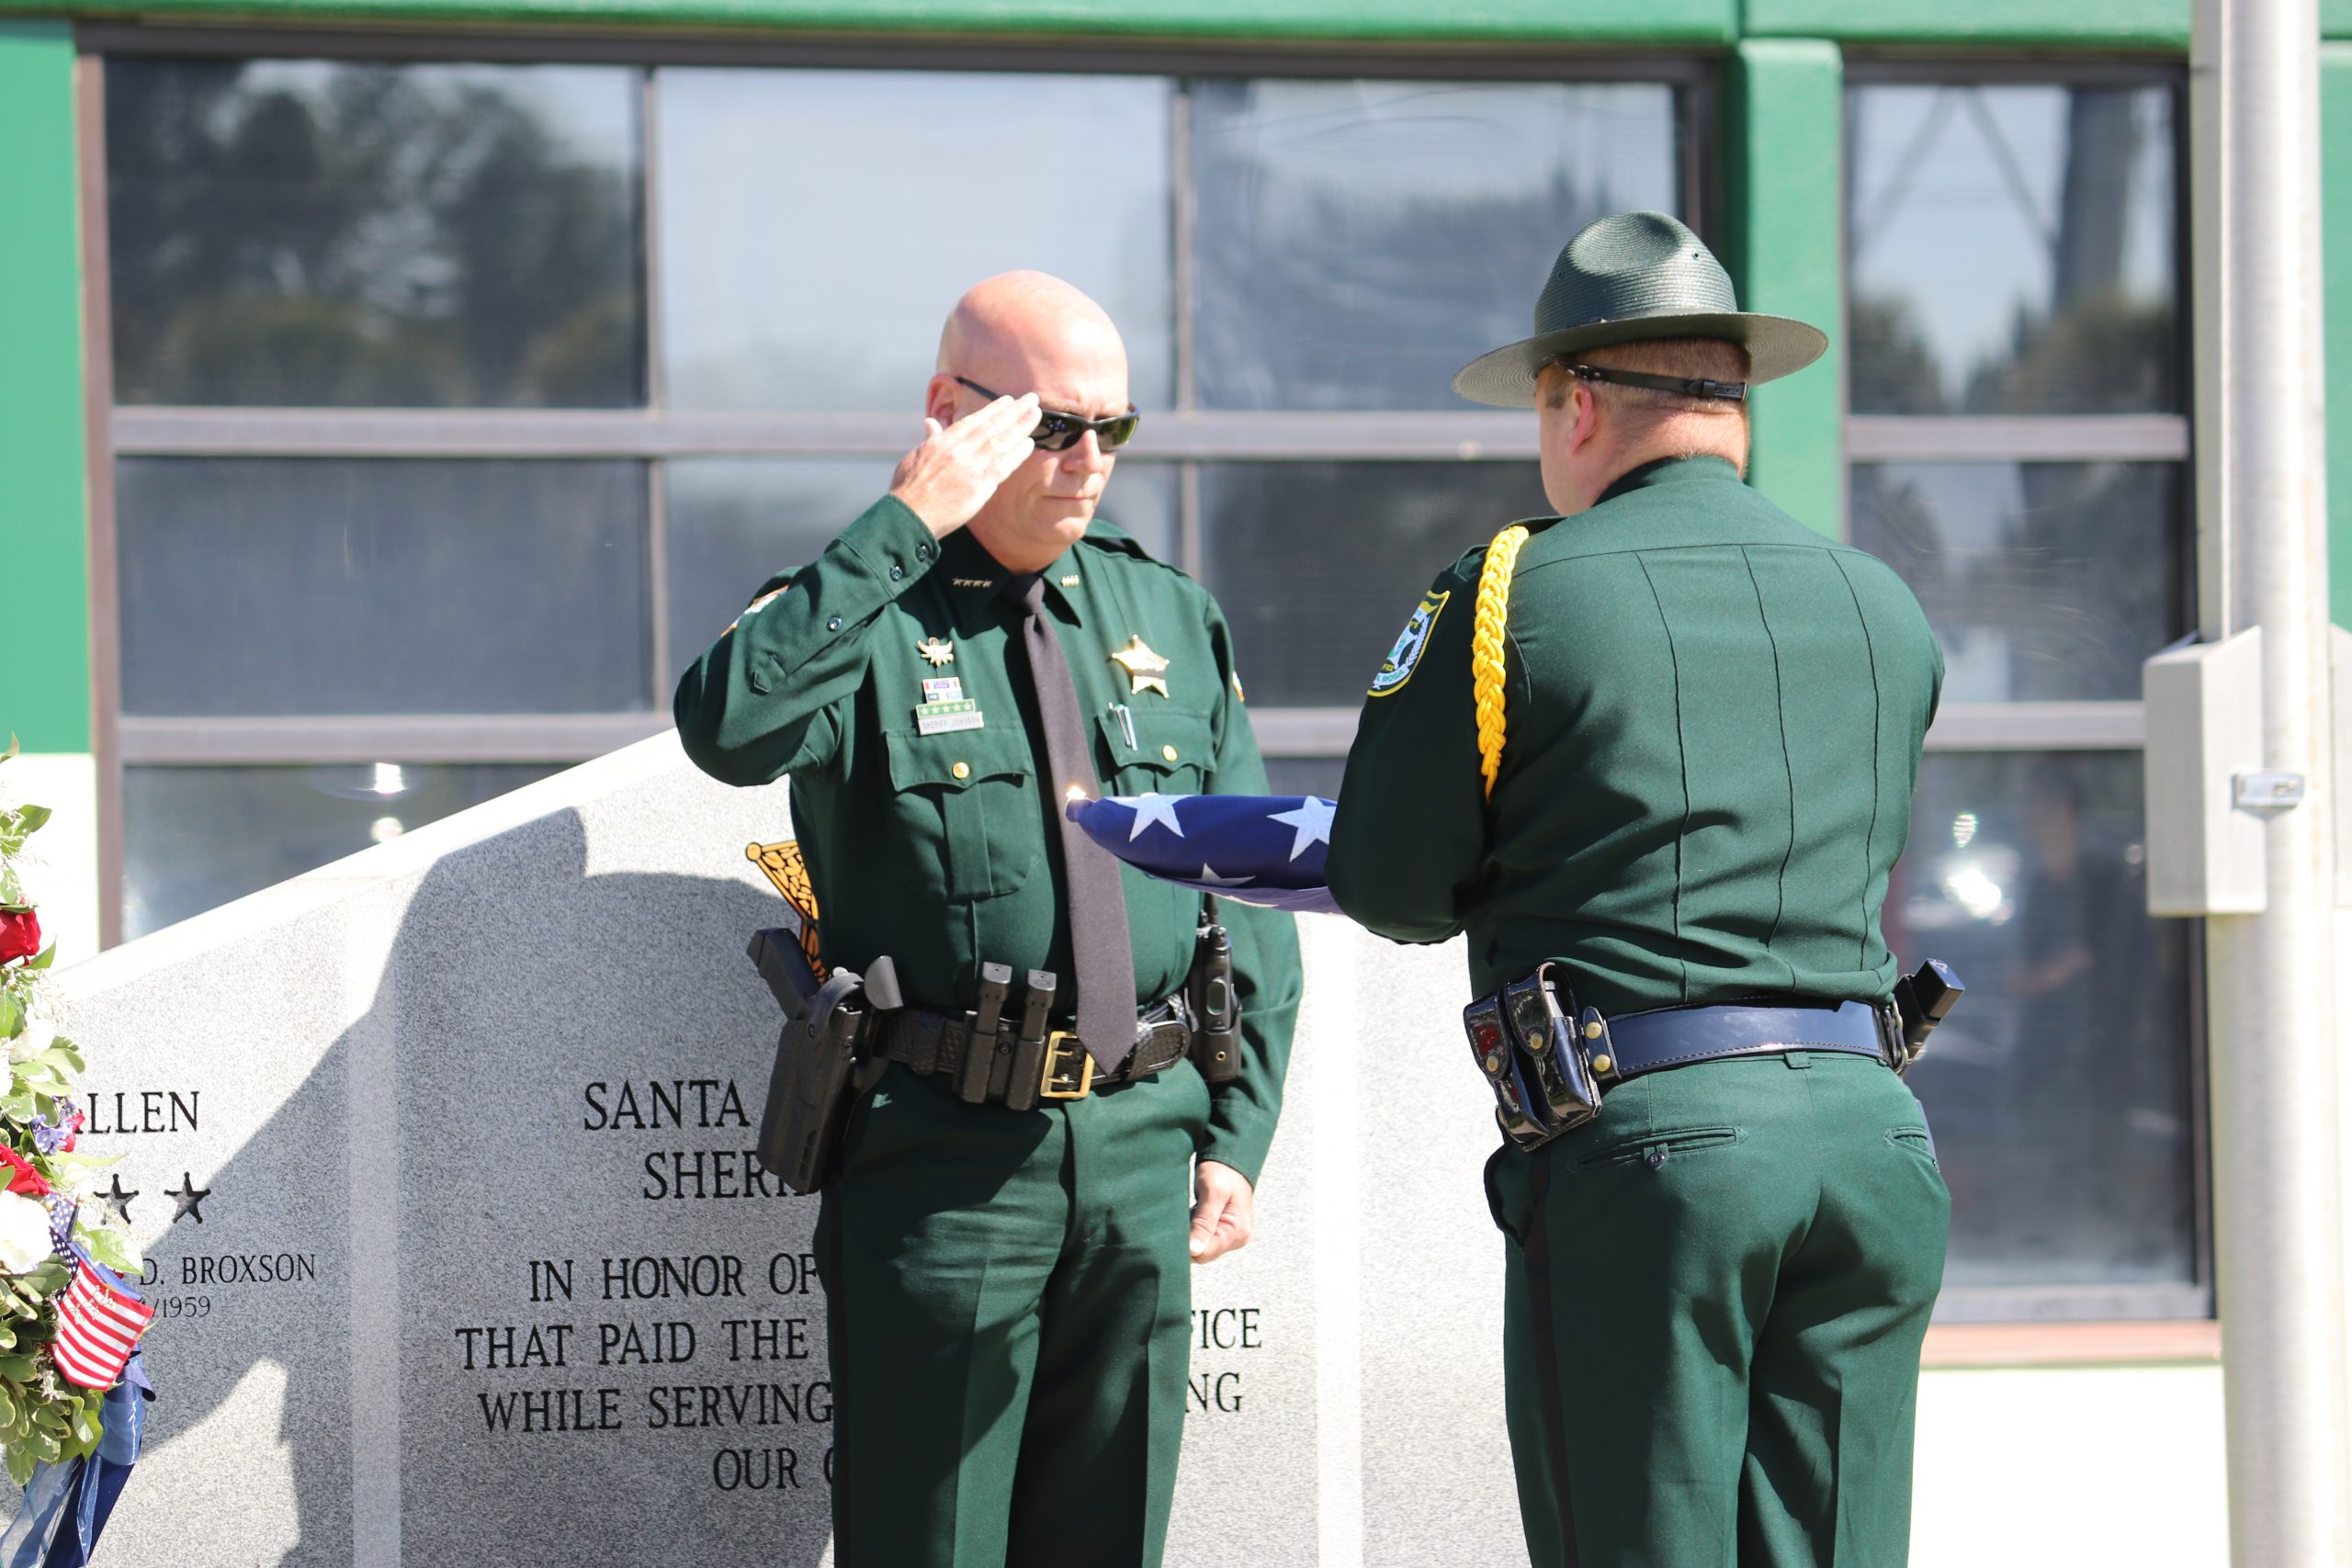 Two sheriff deputies saluting a memorial wreath at a monument during a commemorative ceremony.